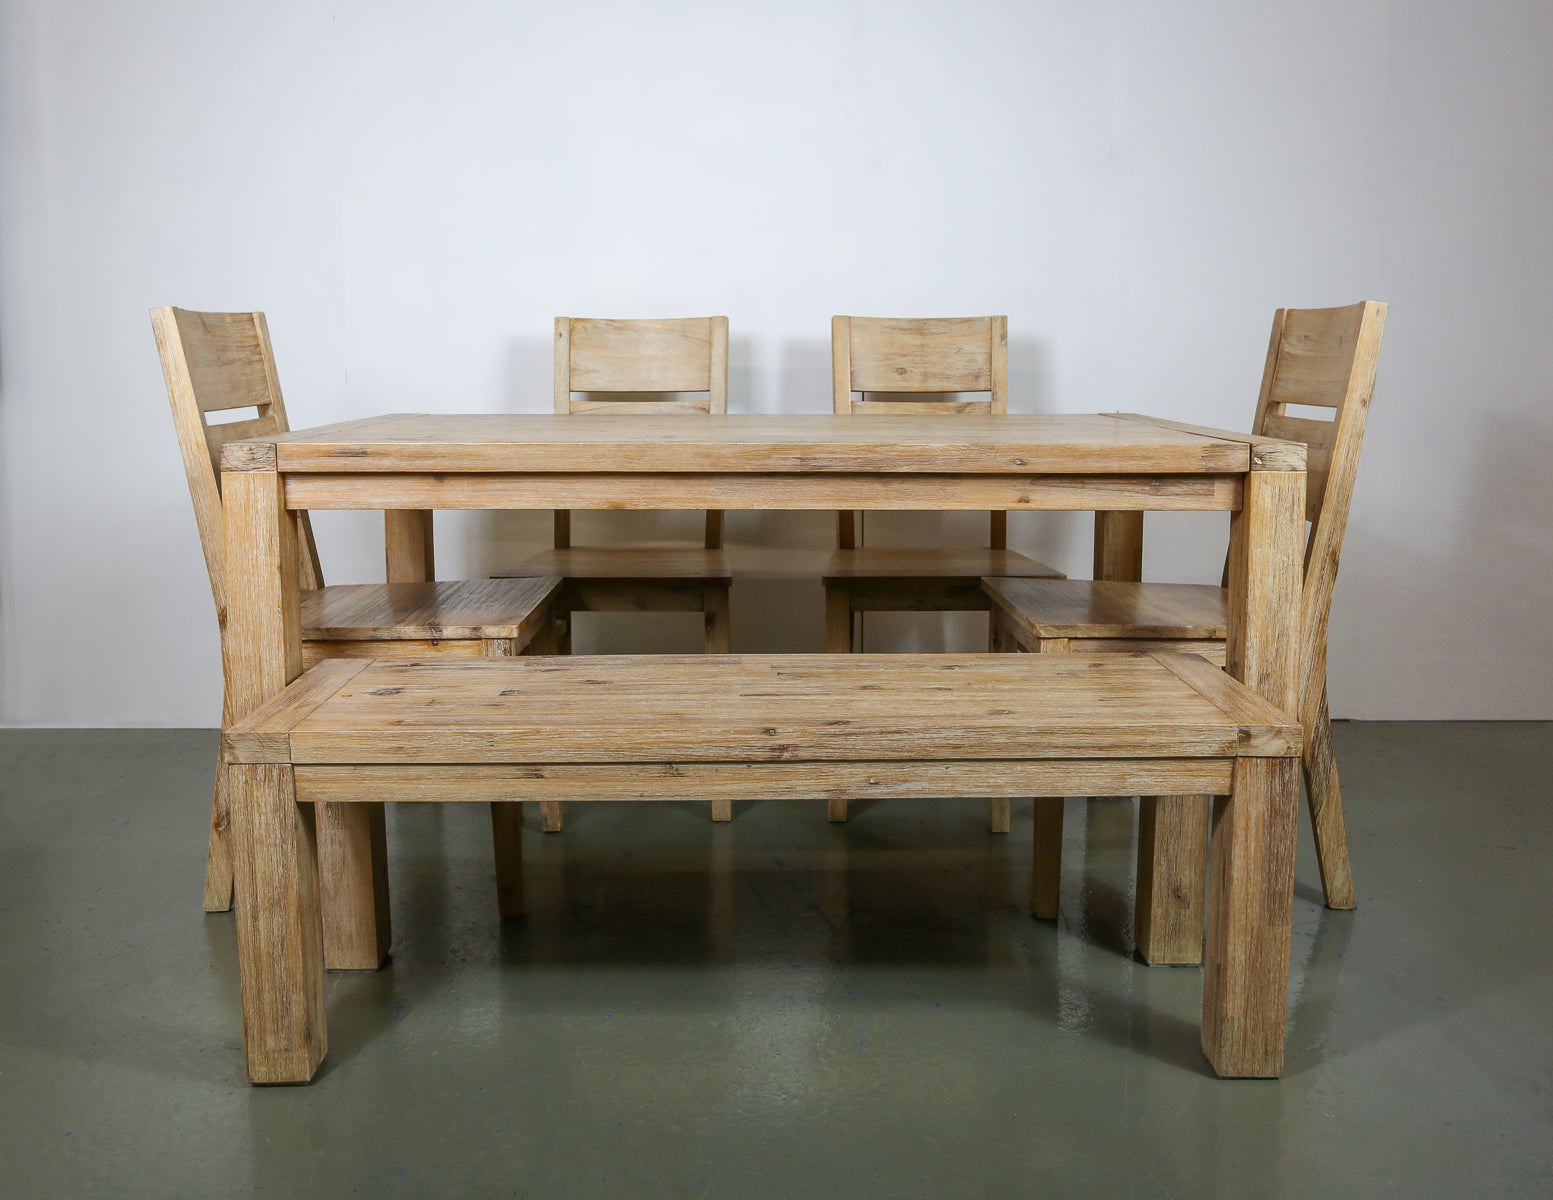 Oak Furniture Land Solid Wood Table, Chairs and Bench